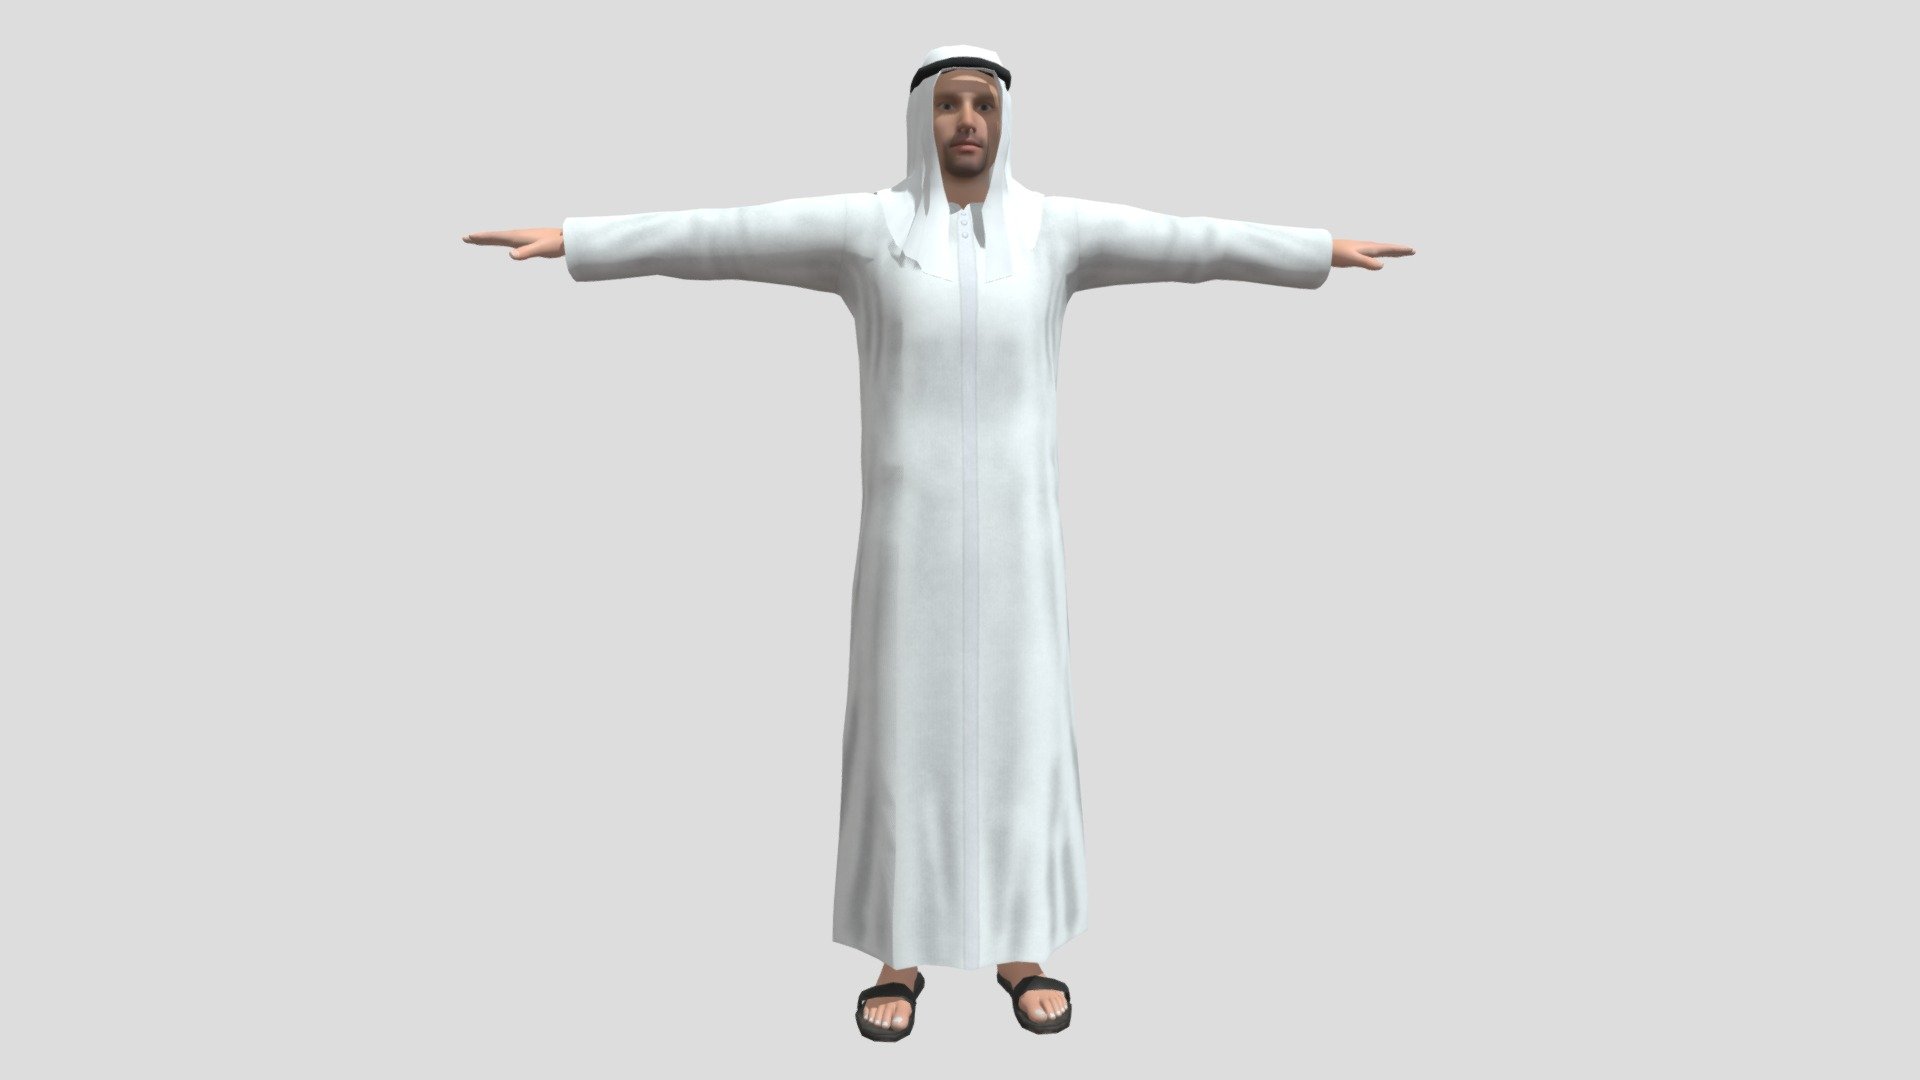 Description:
Arab Male 3D model is a high quality, photo real model that will enhance detail and realism to any of your game projects or commercials. The model has a fully textured, detailed design that allows for close-up renders. 

Features:
• High quality polygonal model with detailed texture, correctly scaled for an accurate representation of the original object.
• Maya 2019 V-Ray and standard materials scenes along with multiple other file formats.
• Texture files are given in .jpg formats for easy access.
• All preview images are rendered using Autodesk Maya vray
• No cleaning up necessary, just drop your models into the scene, Load the texture and start rendering.
• No special plugin needed to open scene 3d model